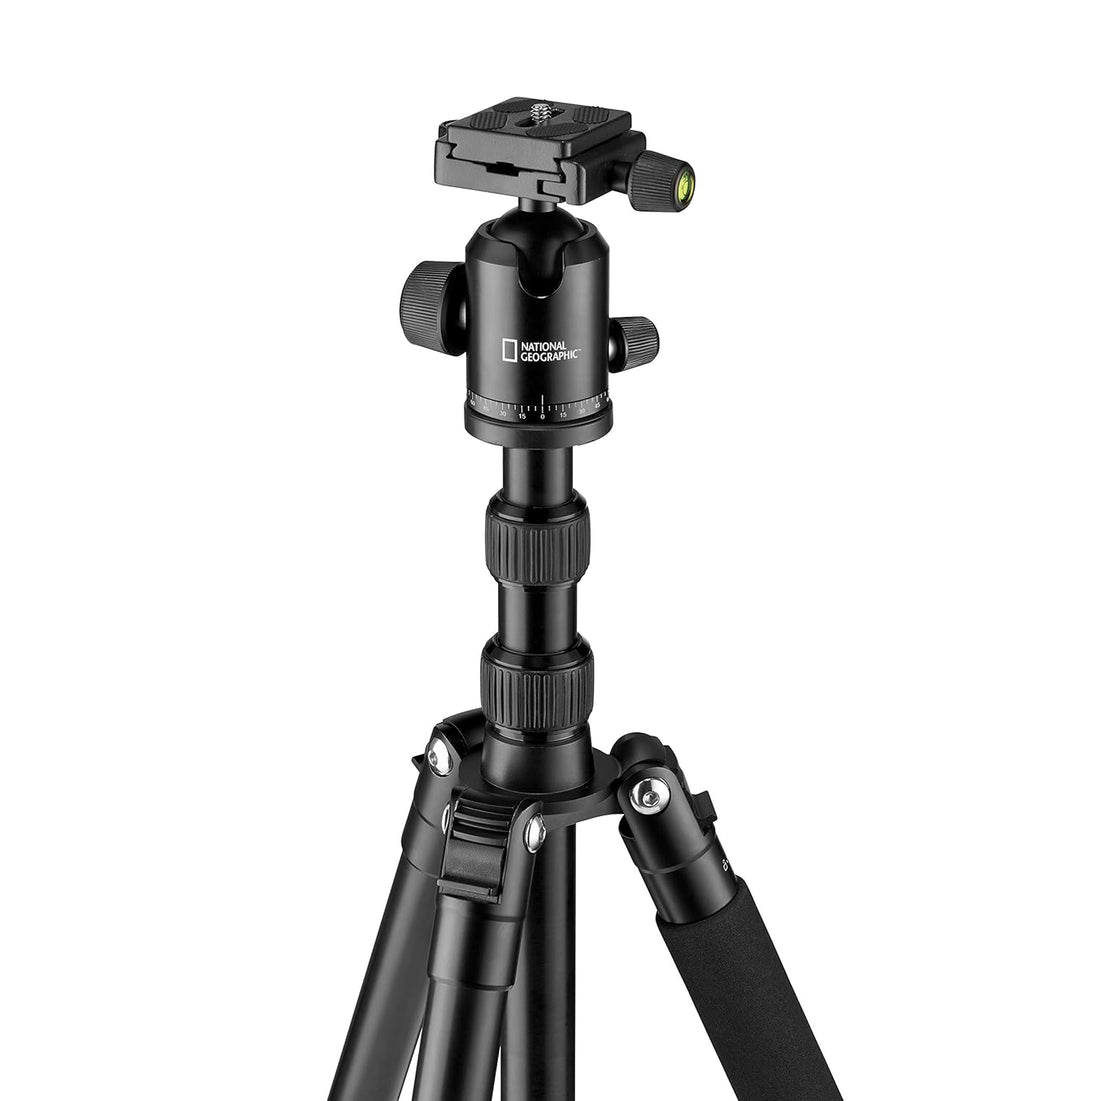 National Geographic Travel Photo Tripod Kit with Monopod, Aluminium, 5-Section Legs, Twist Locks, Load up 8kg, Carrying Bag, Ball Head, Quick Release, NGTR002T,Black